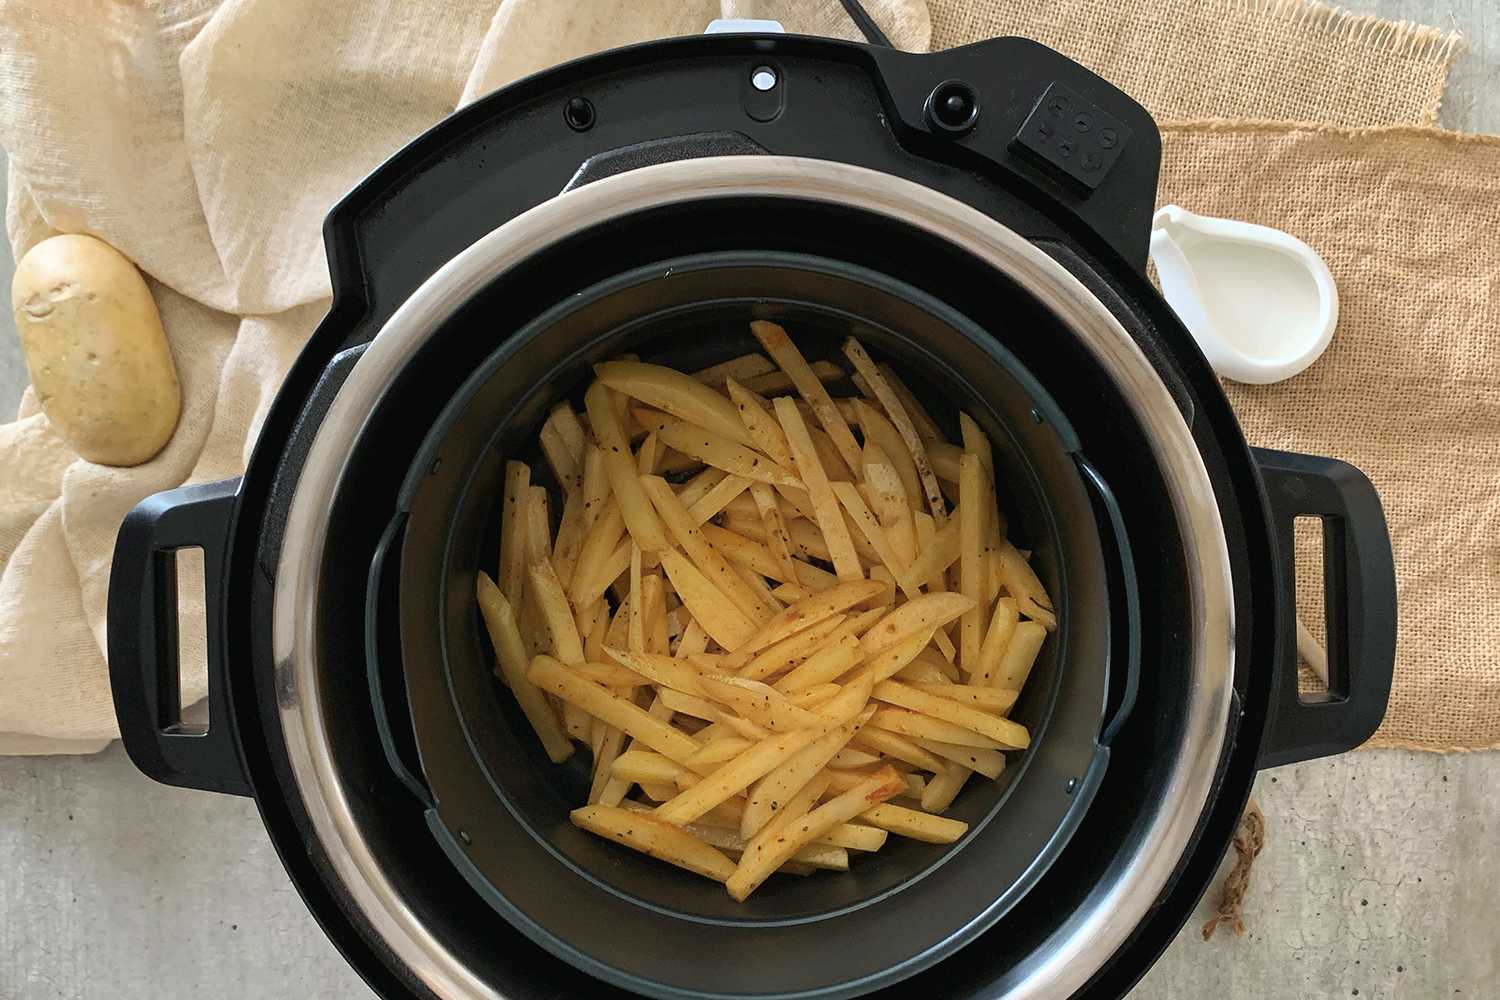 https://www.corriecooks.com/wp-content/uploads/2022/07/french-fries-before-cooking.jpeg